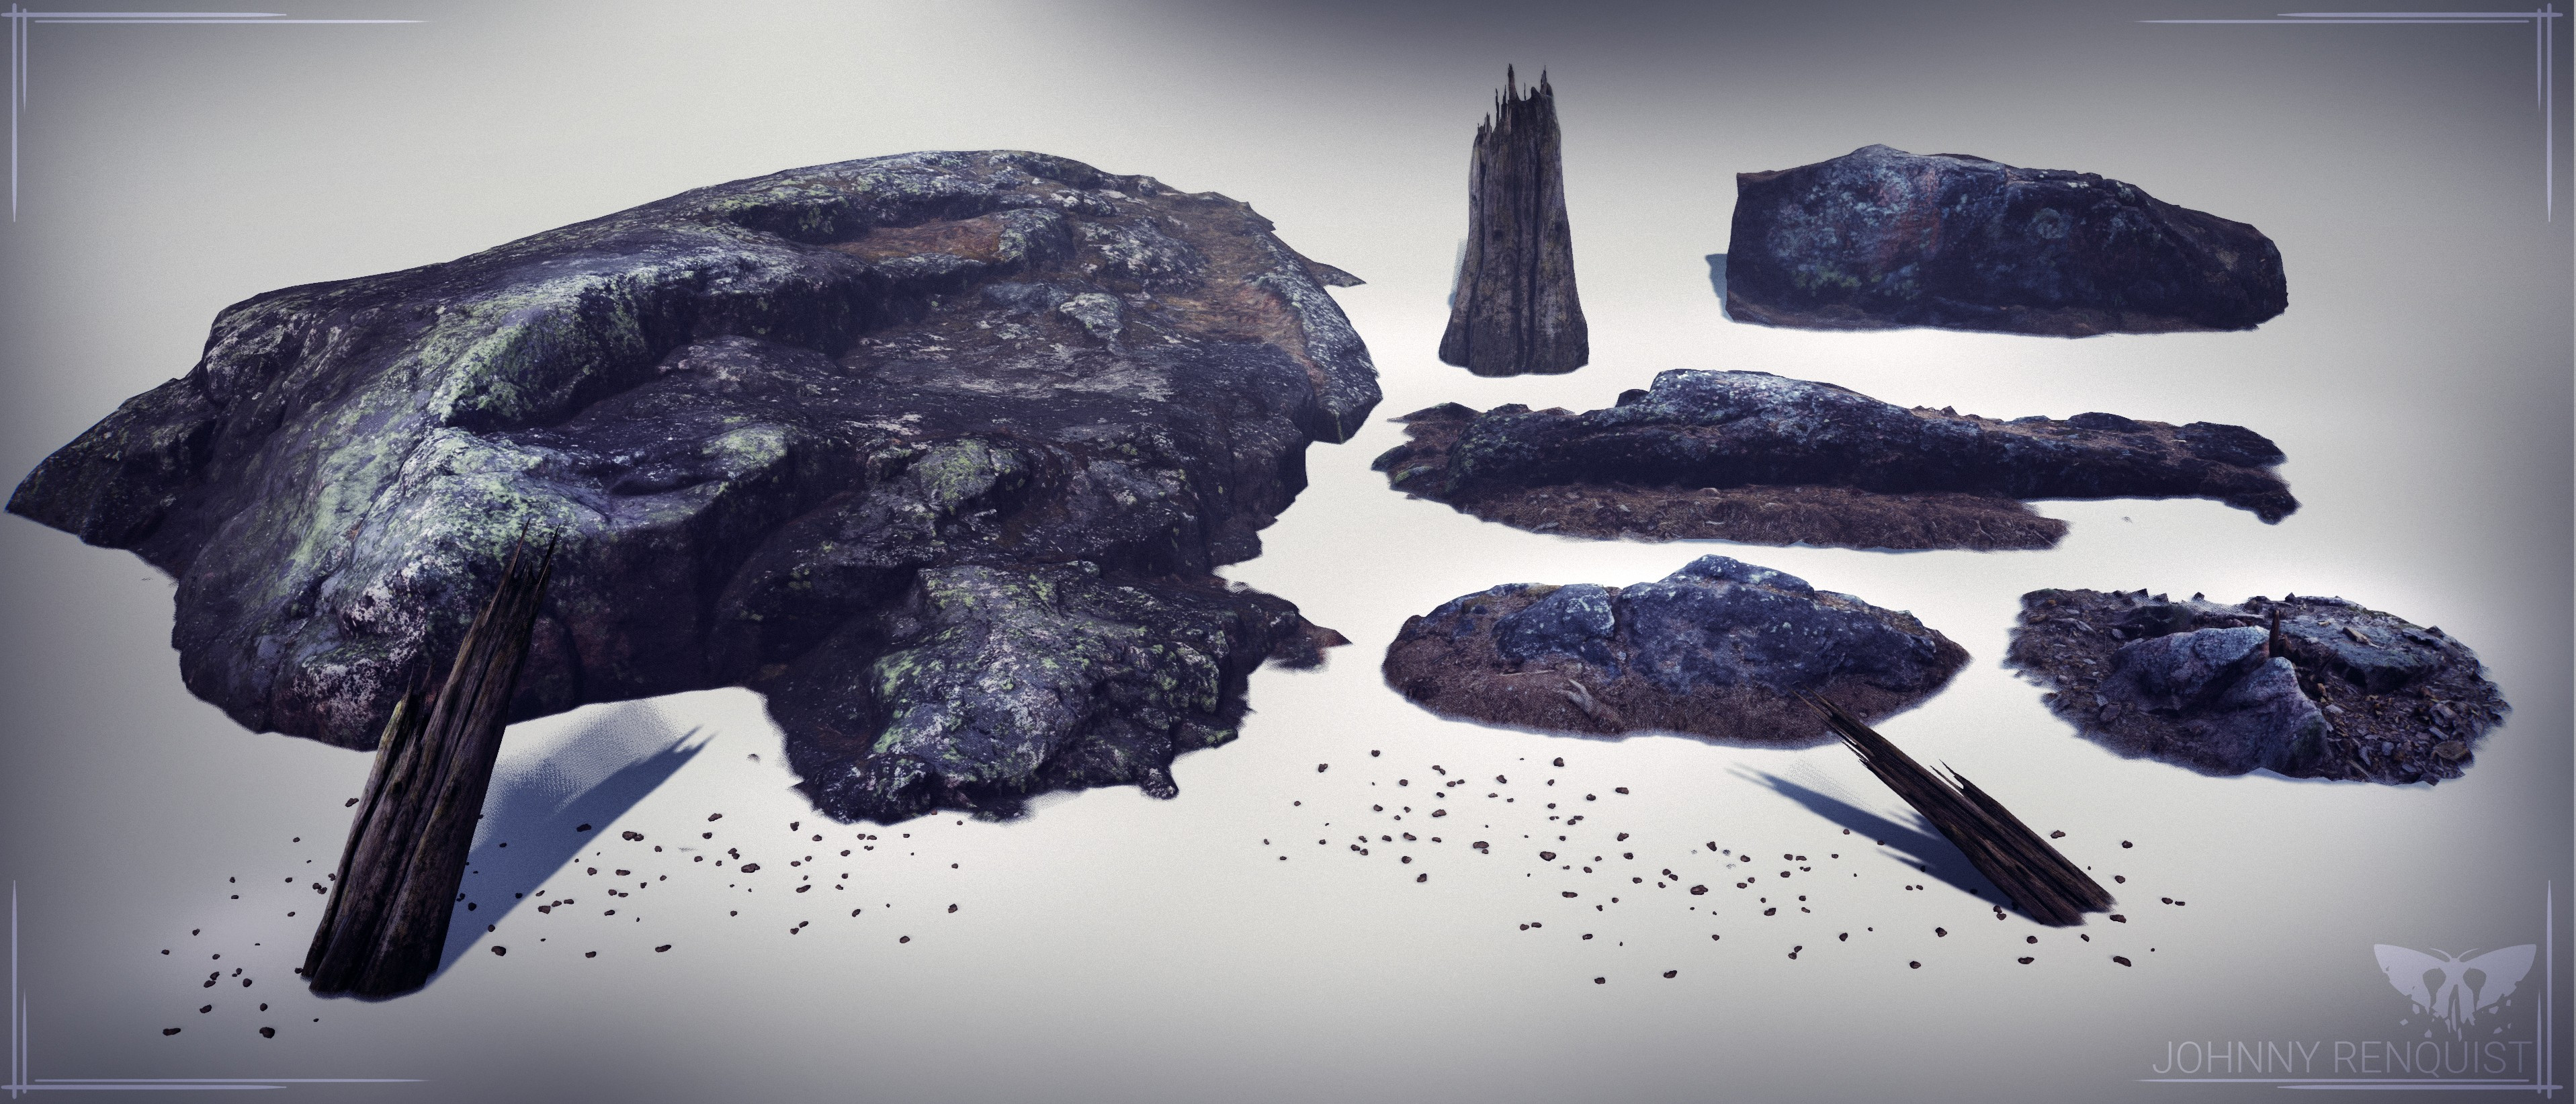 Used photogrammetry for my organic assets.  